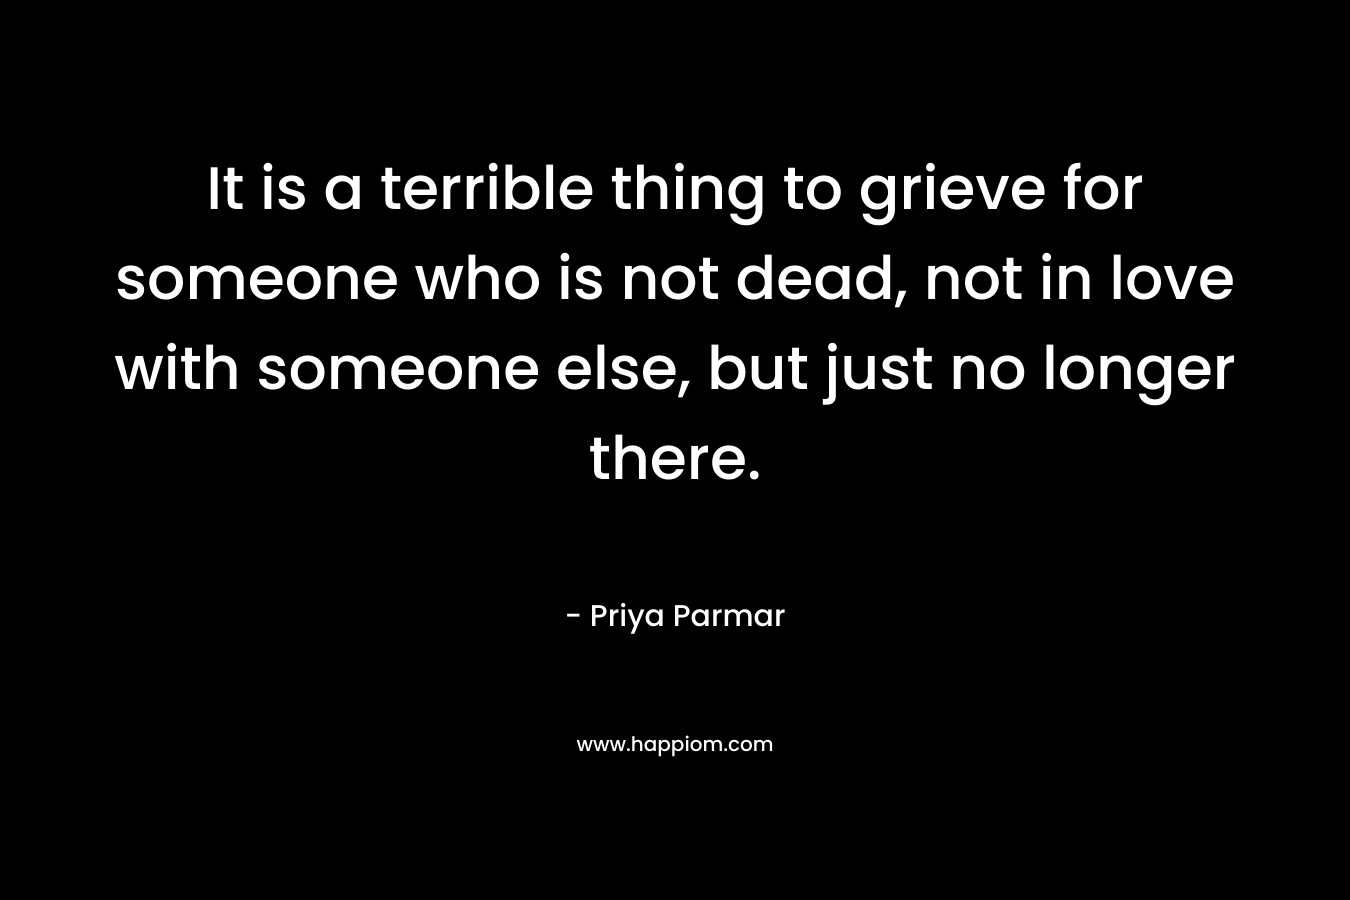 It is a terrible thing to grieve for someone who is not dead, not in love with someone else, but just no longer there. – Priya Parmar